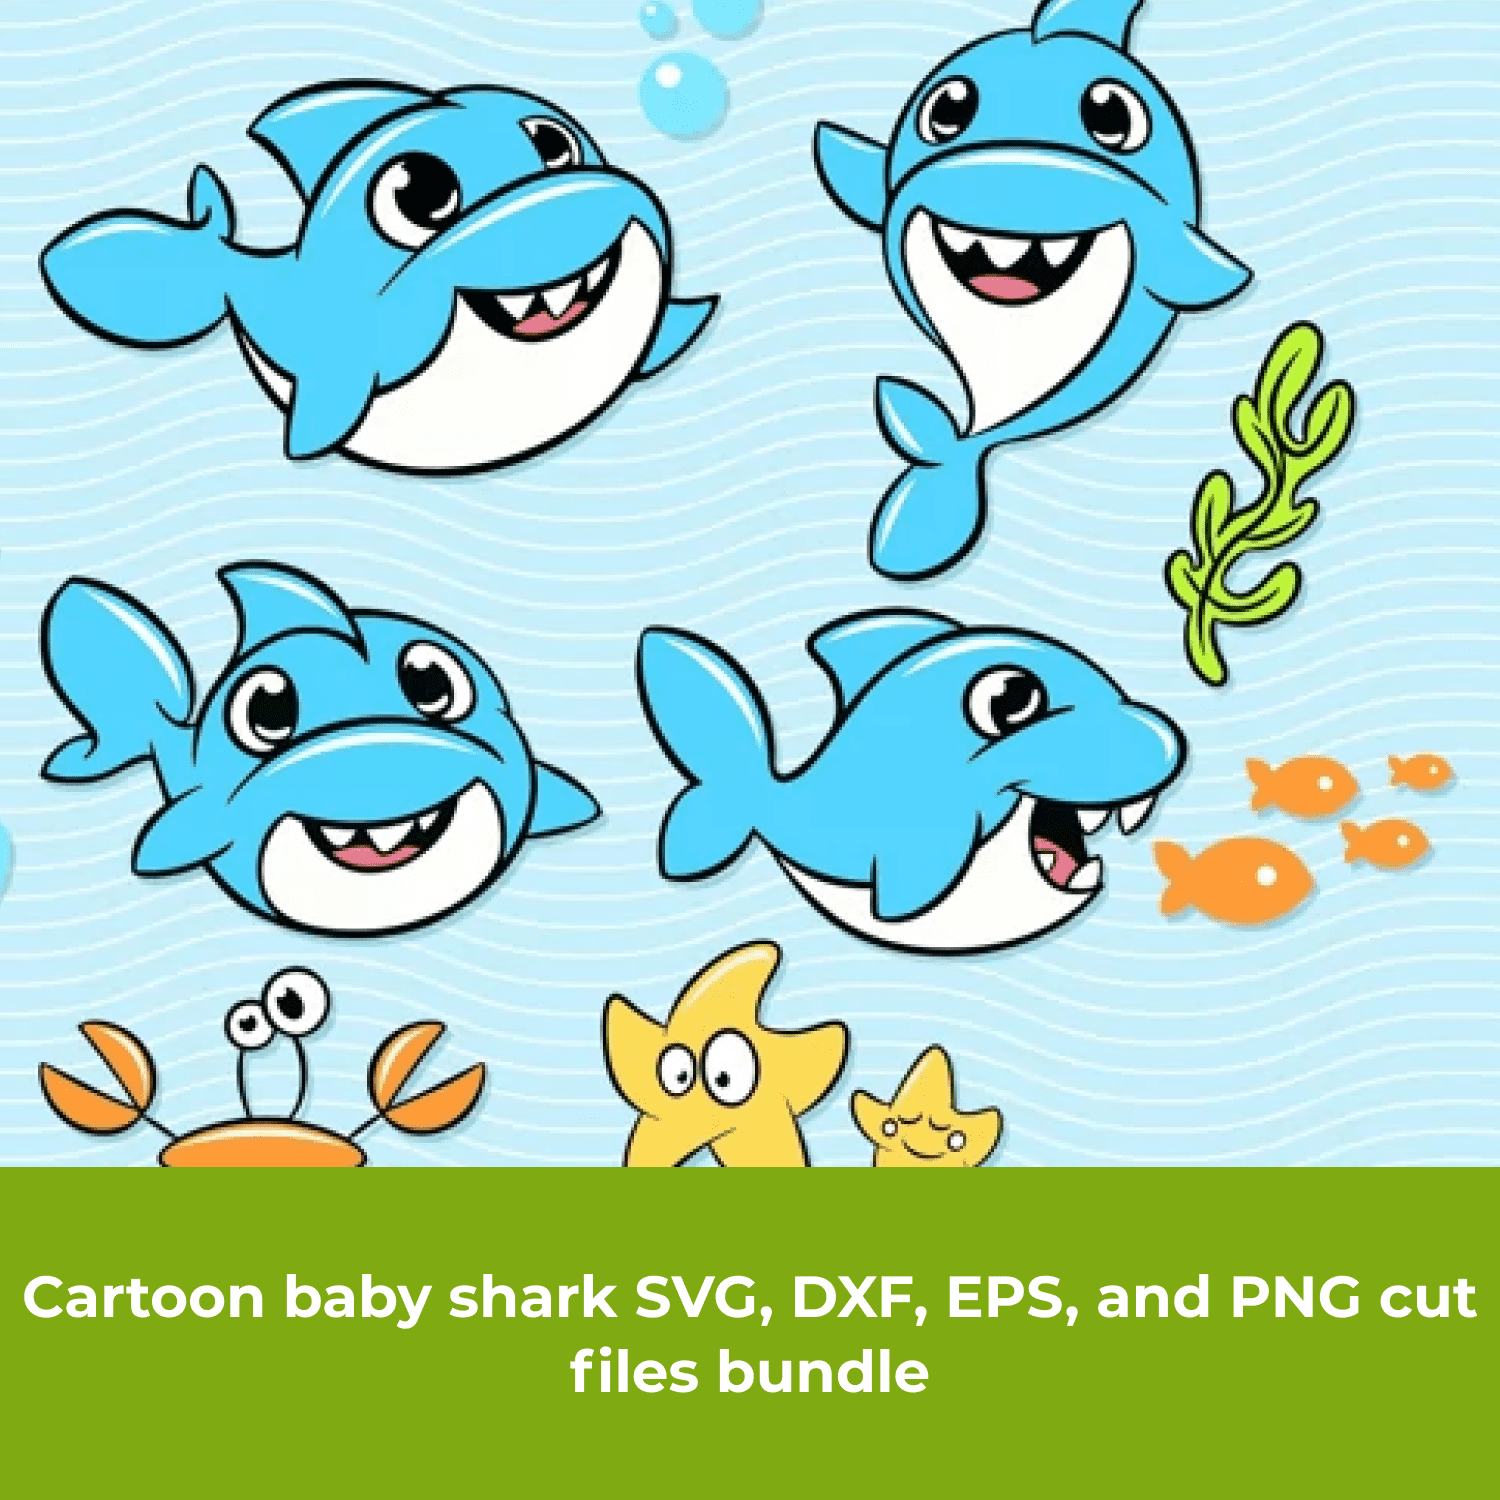 Cartoon baby shark SVG, DXF, EPS, and PNG cut files bundle cover.